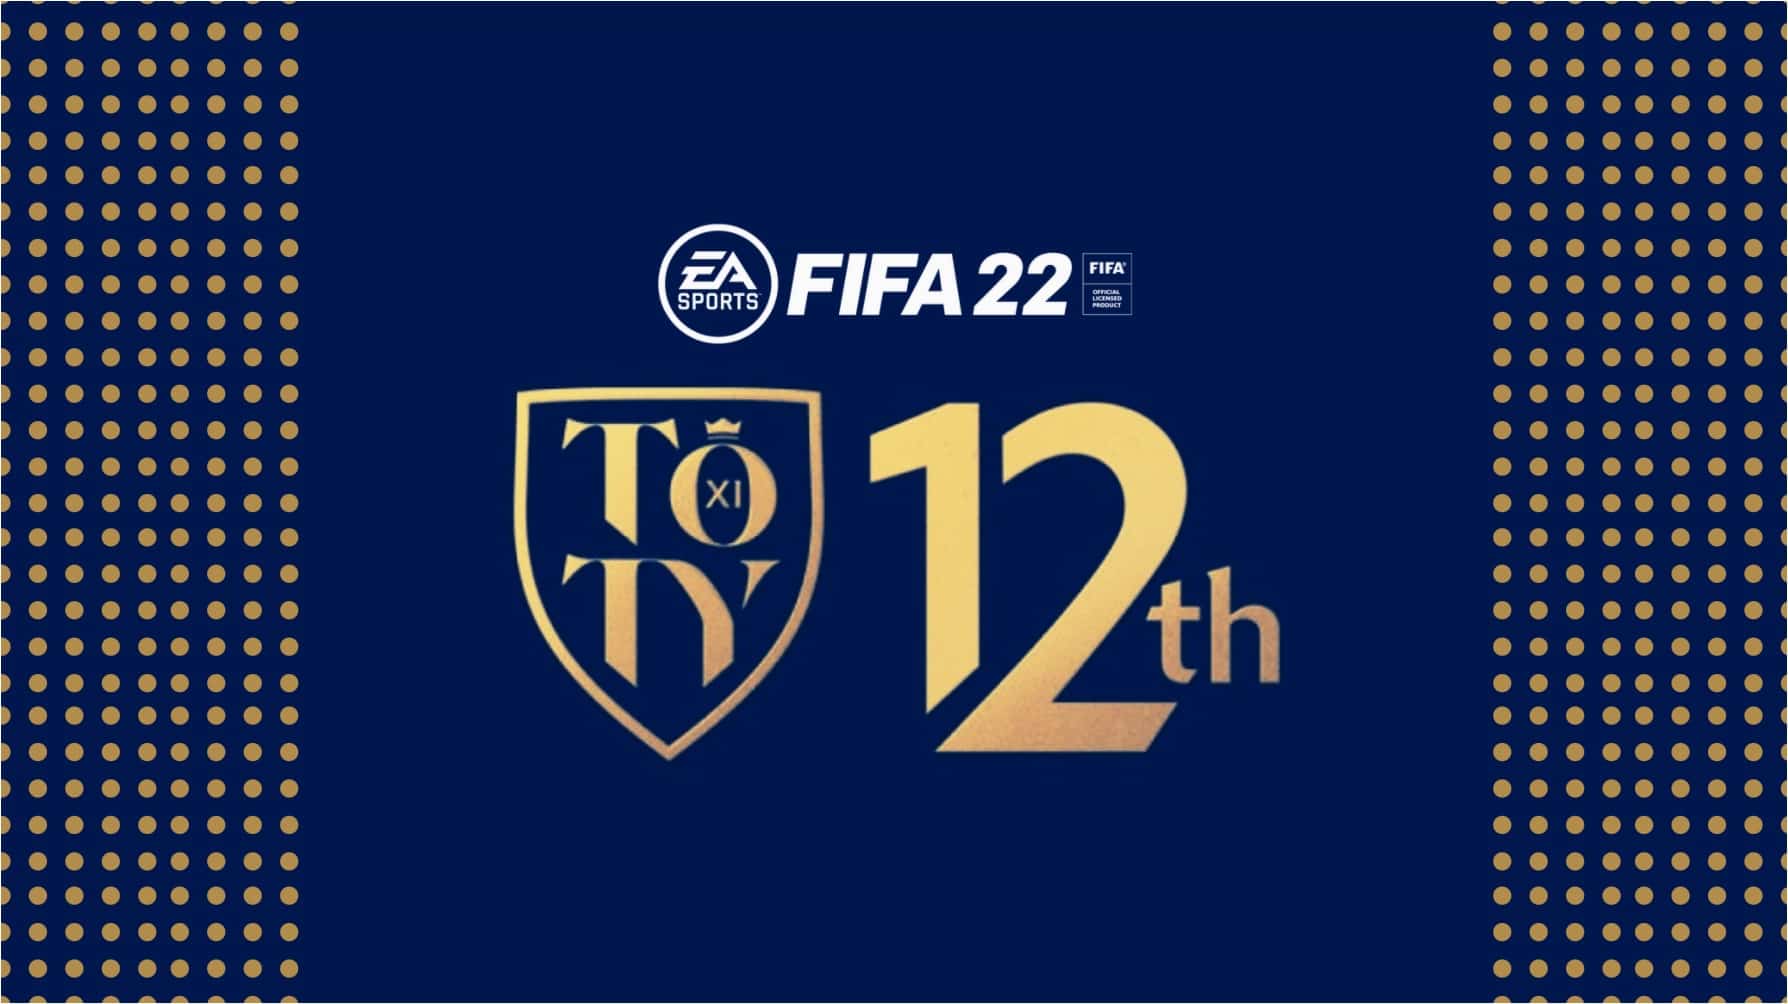 FIFA 23 Companion App: How to login expected steps